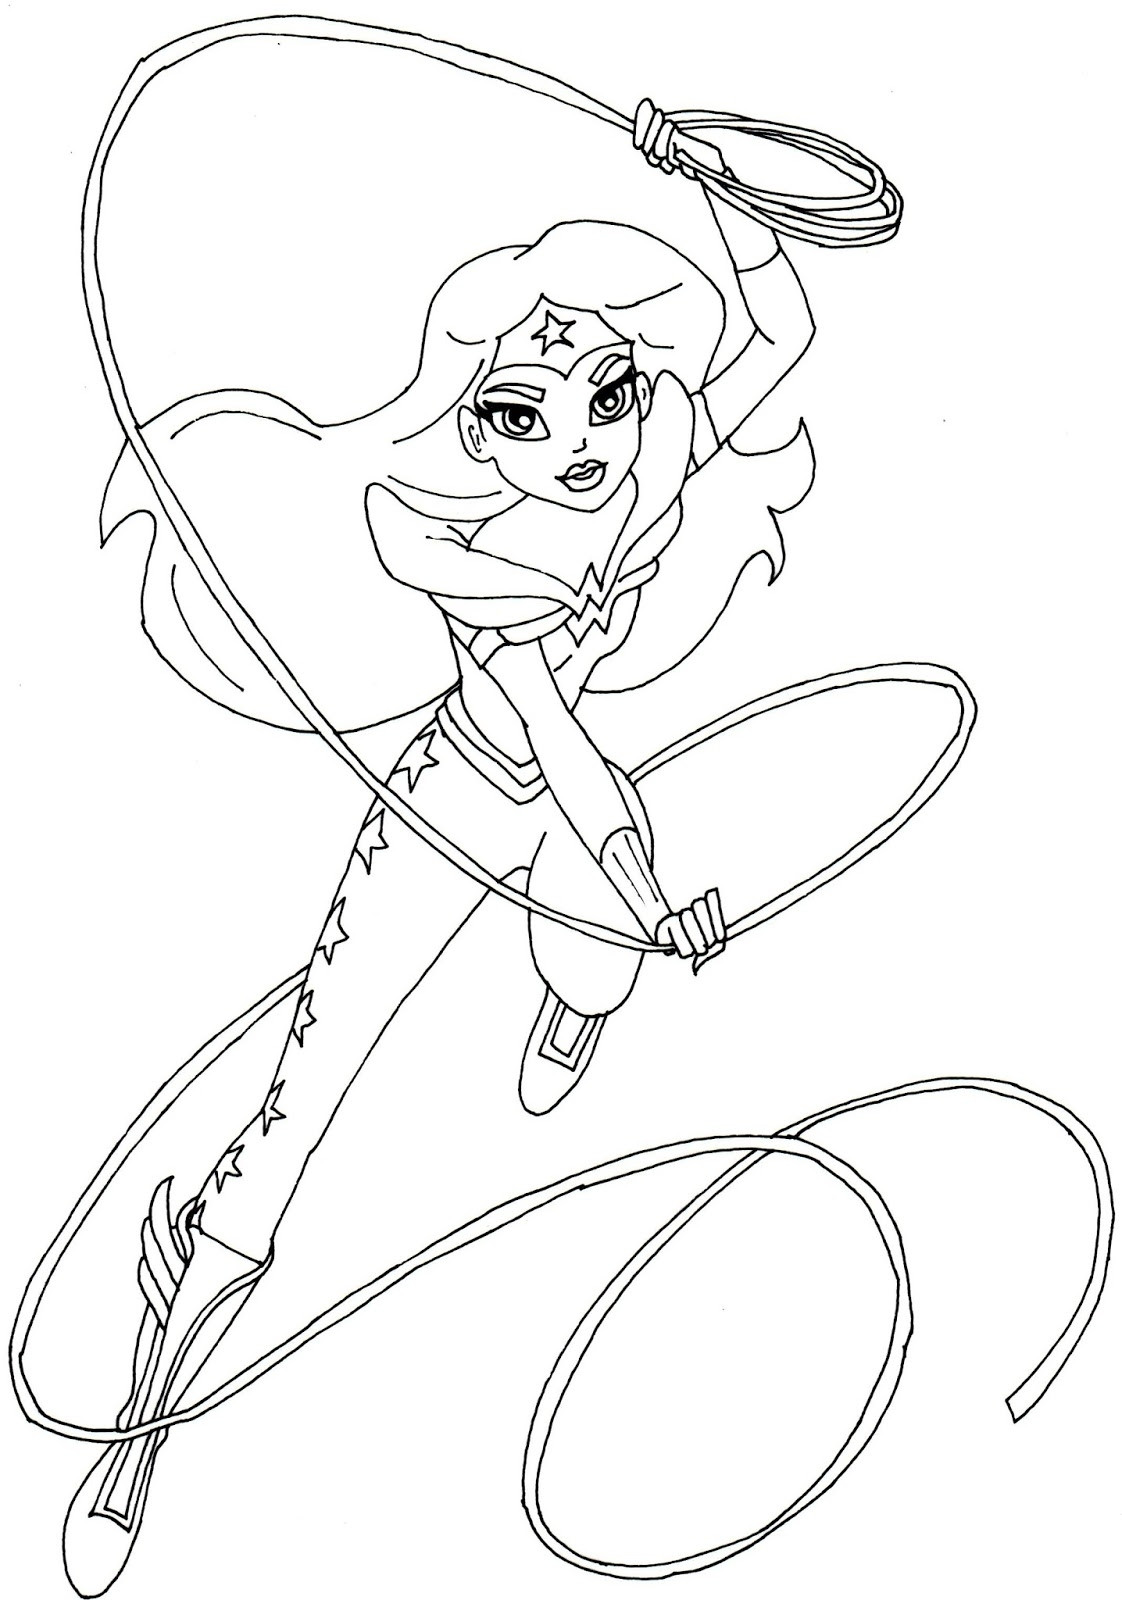 Dc Girls Coloring Pages
 Super Hero Girls Coloring Pages at GetColorings